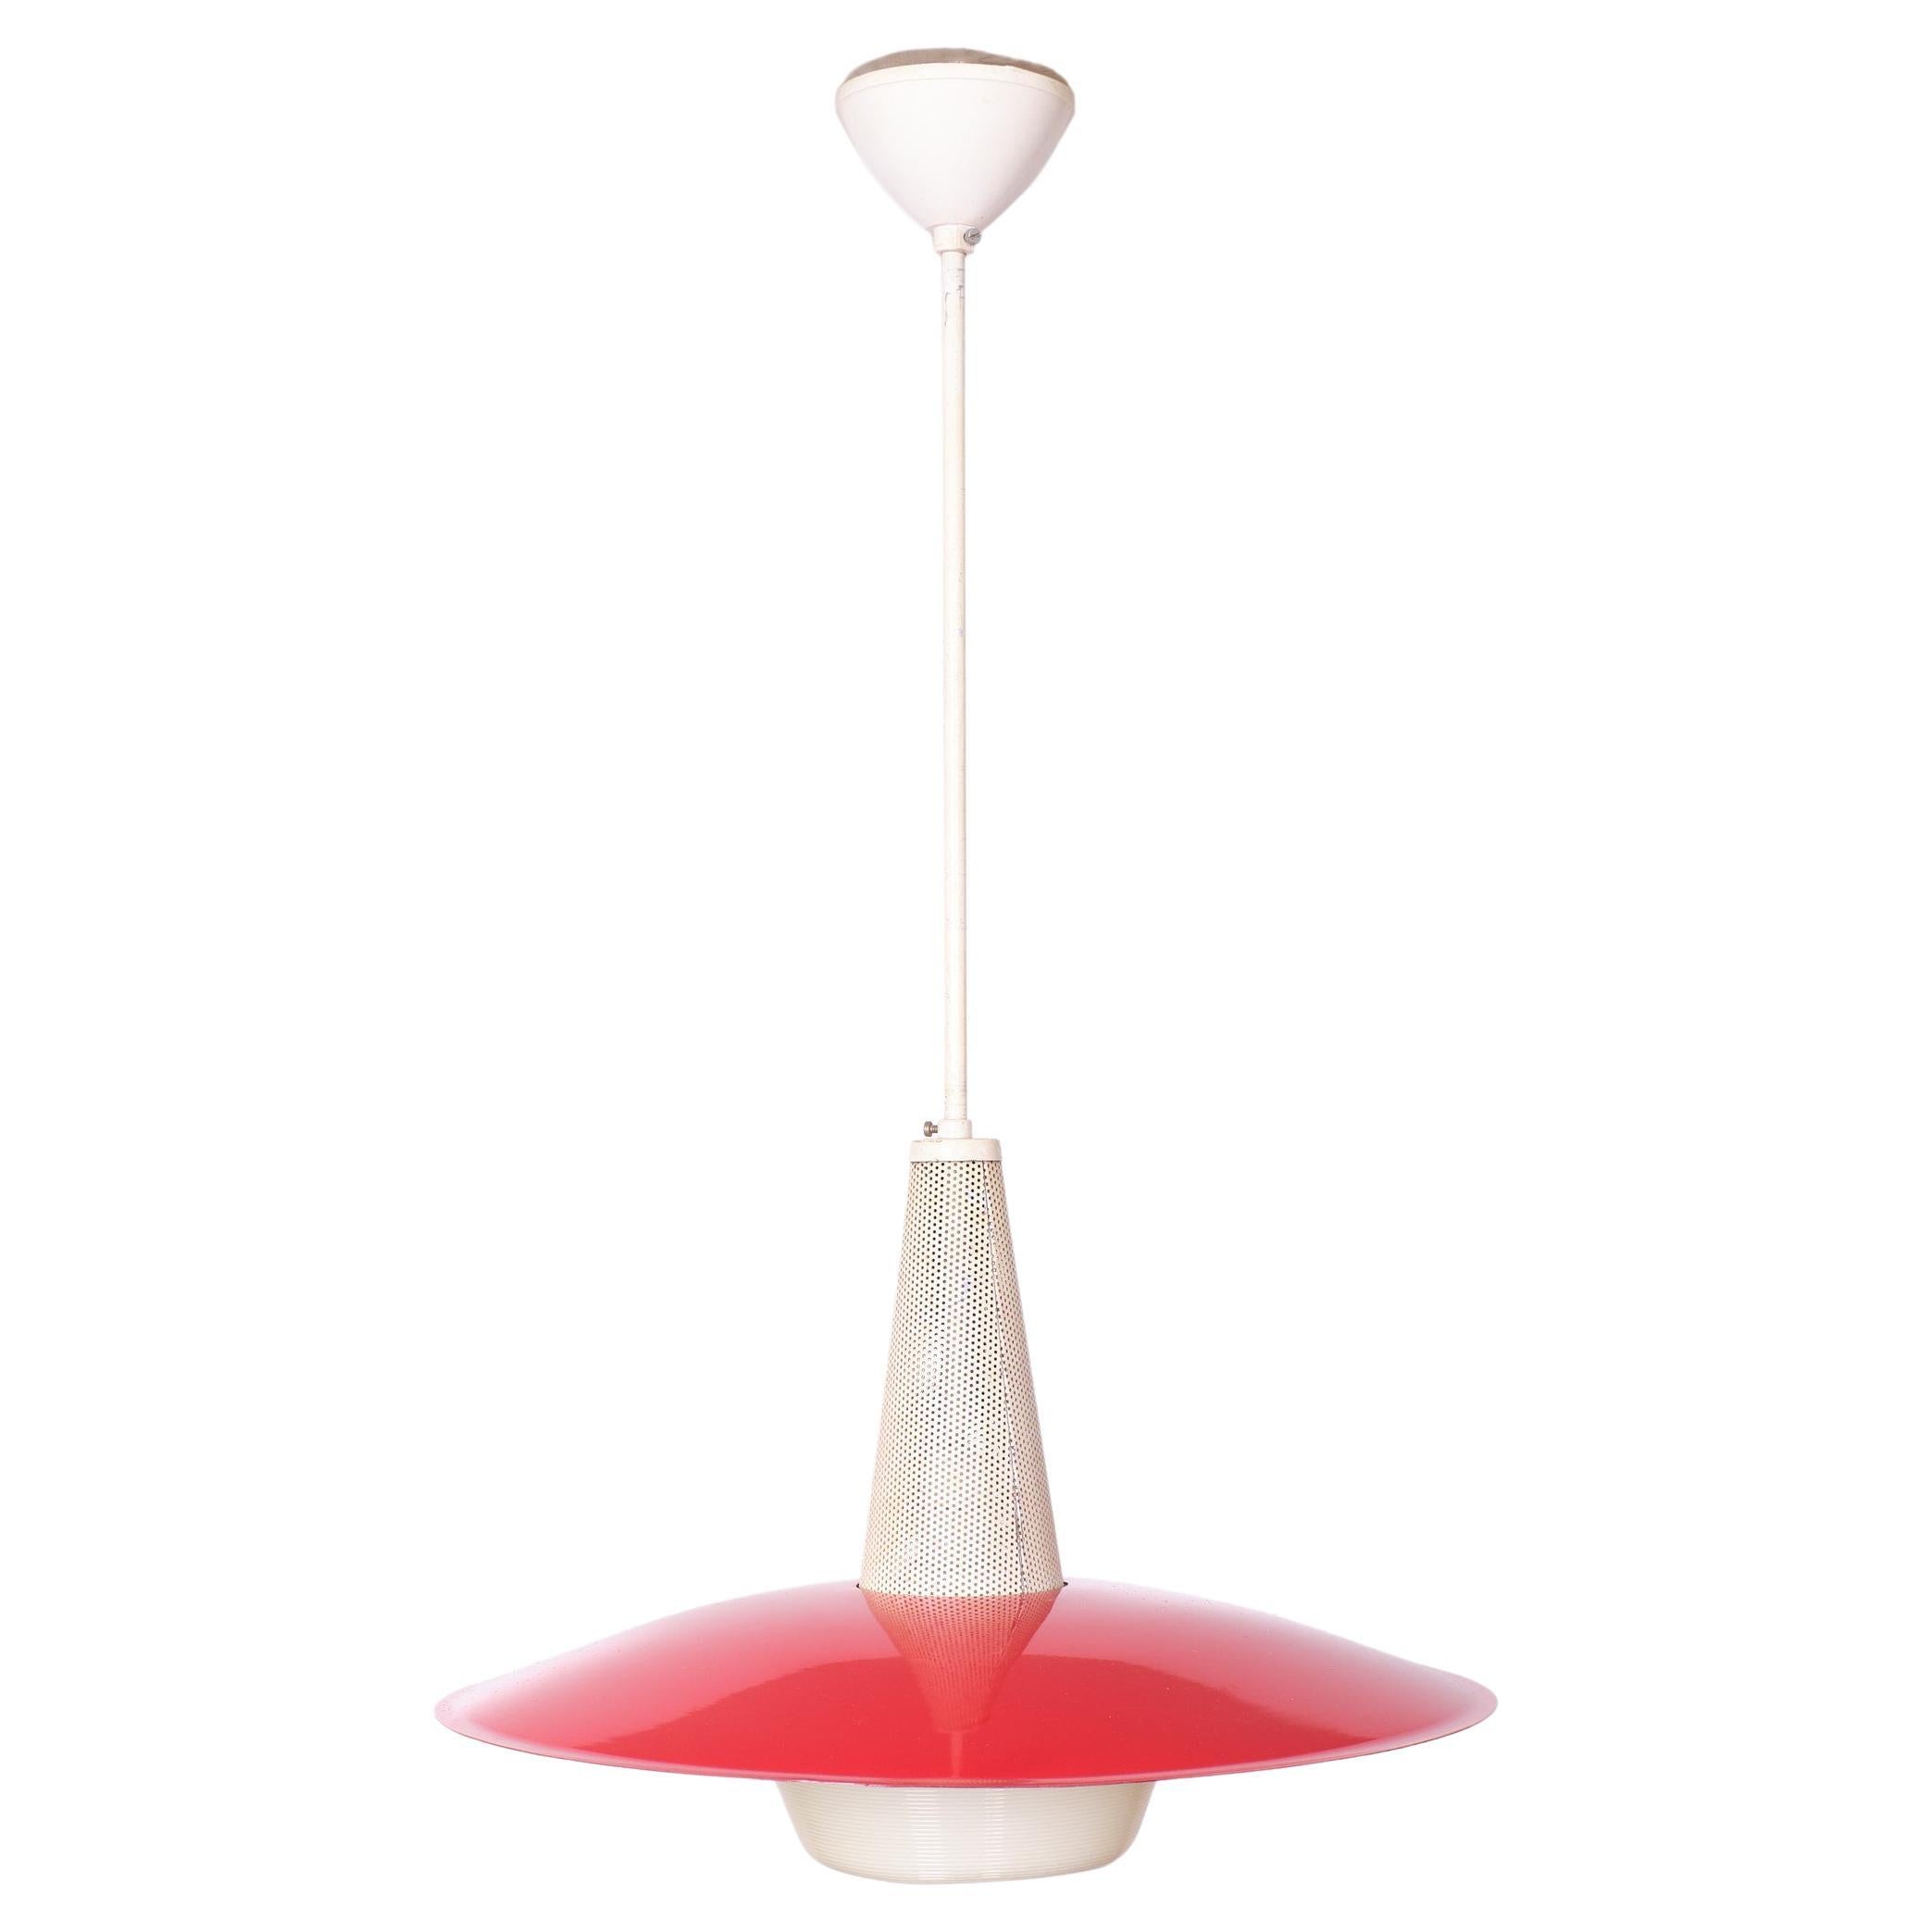 Another Great Design by Louis Kallf for Philips Earley 1960s. Red Metal shade.
White Perforated tapered Metal coon. Plastic round inner shade. All complete and original.
One large E27 bulb needed.